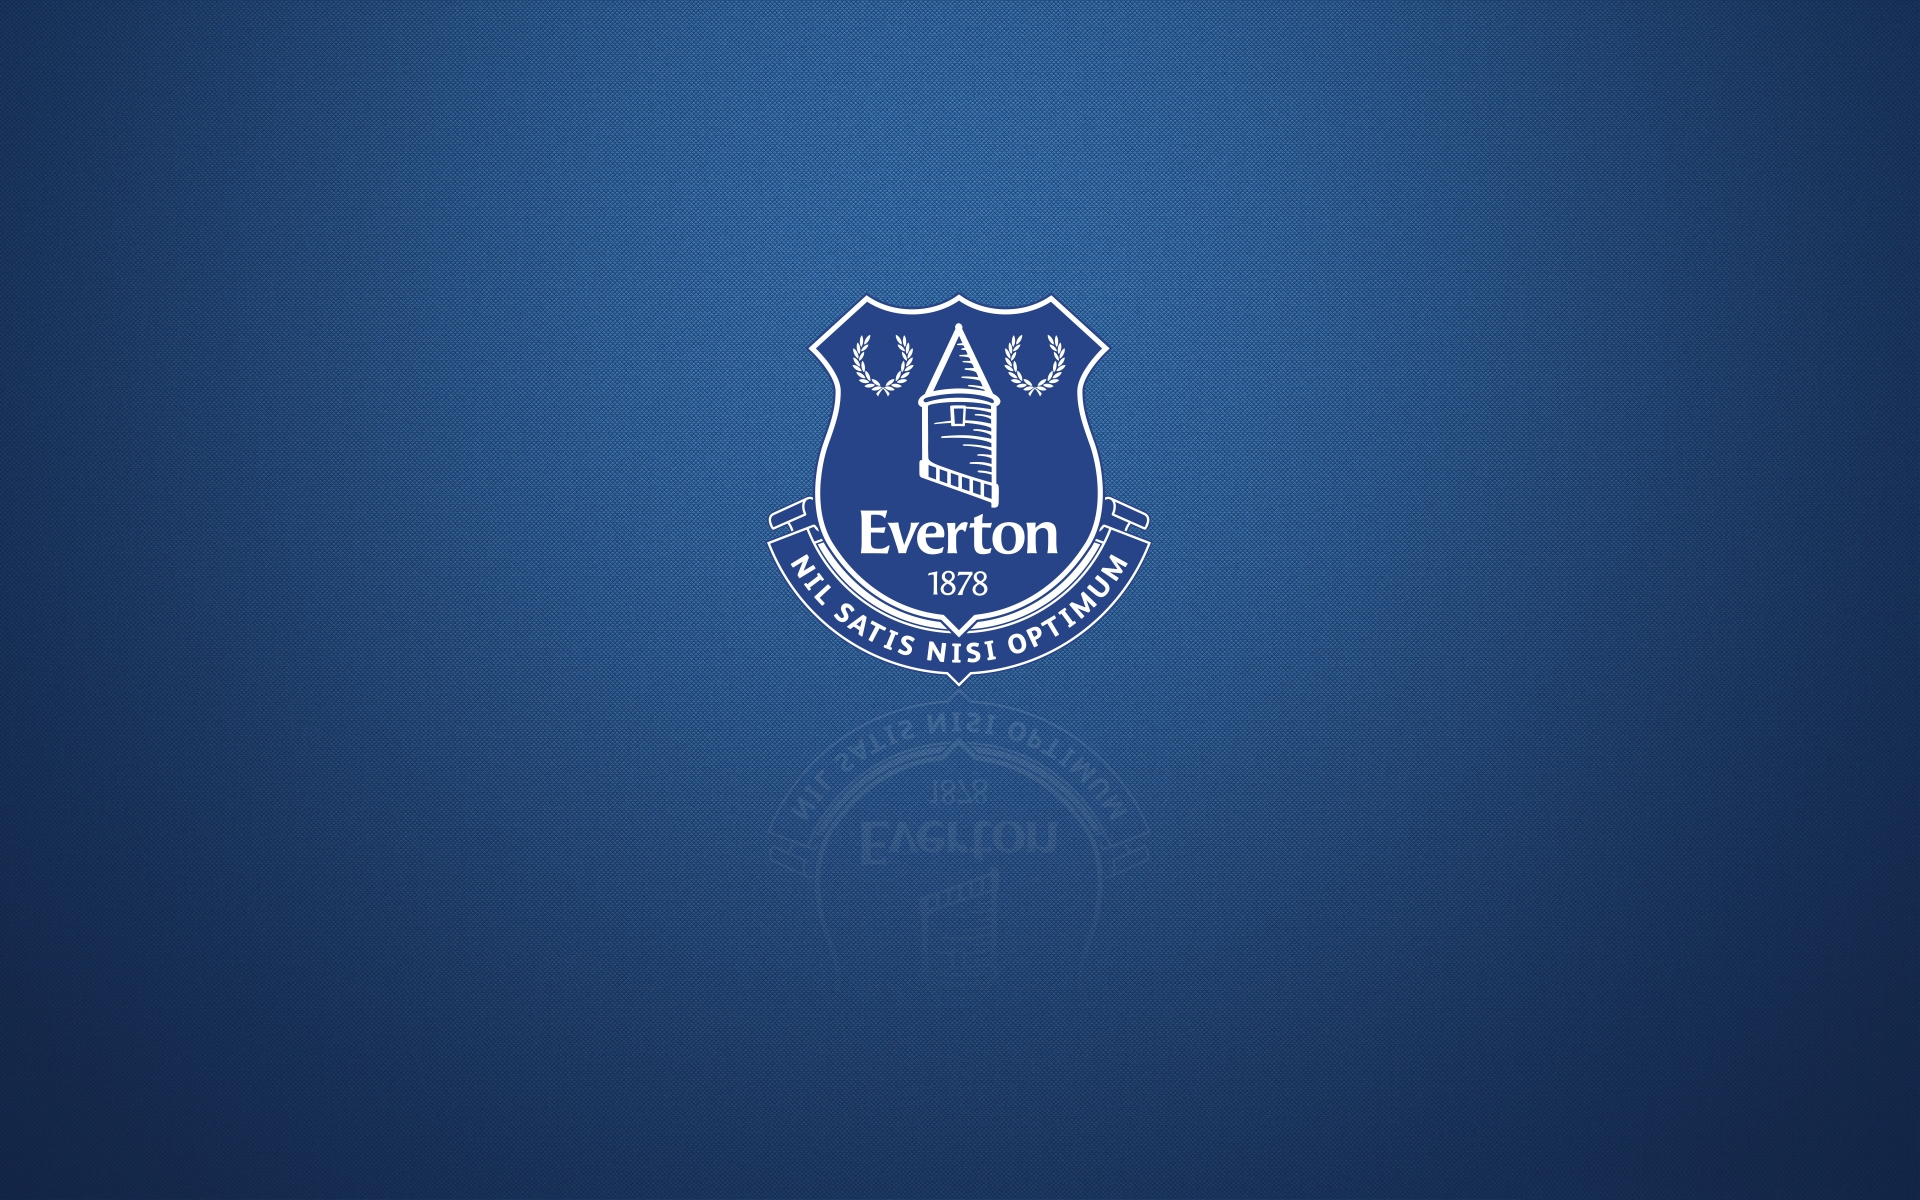 New Everton stadium gets planning permission green light | The Independent